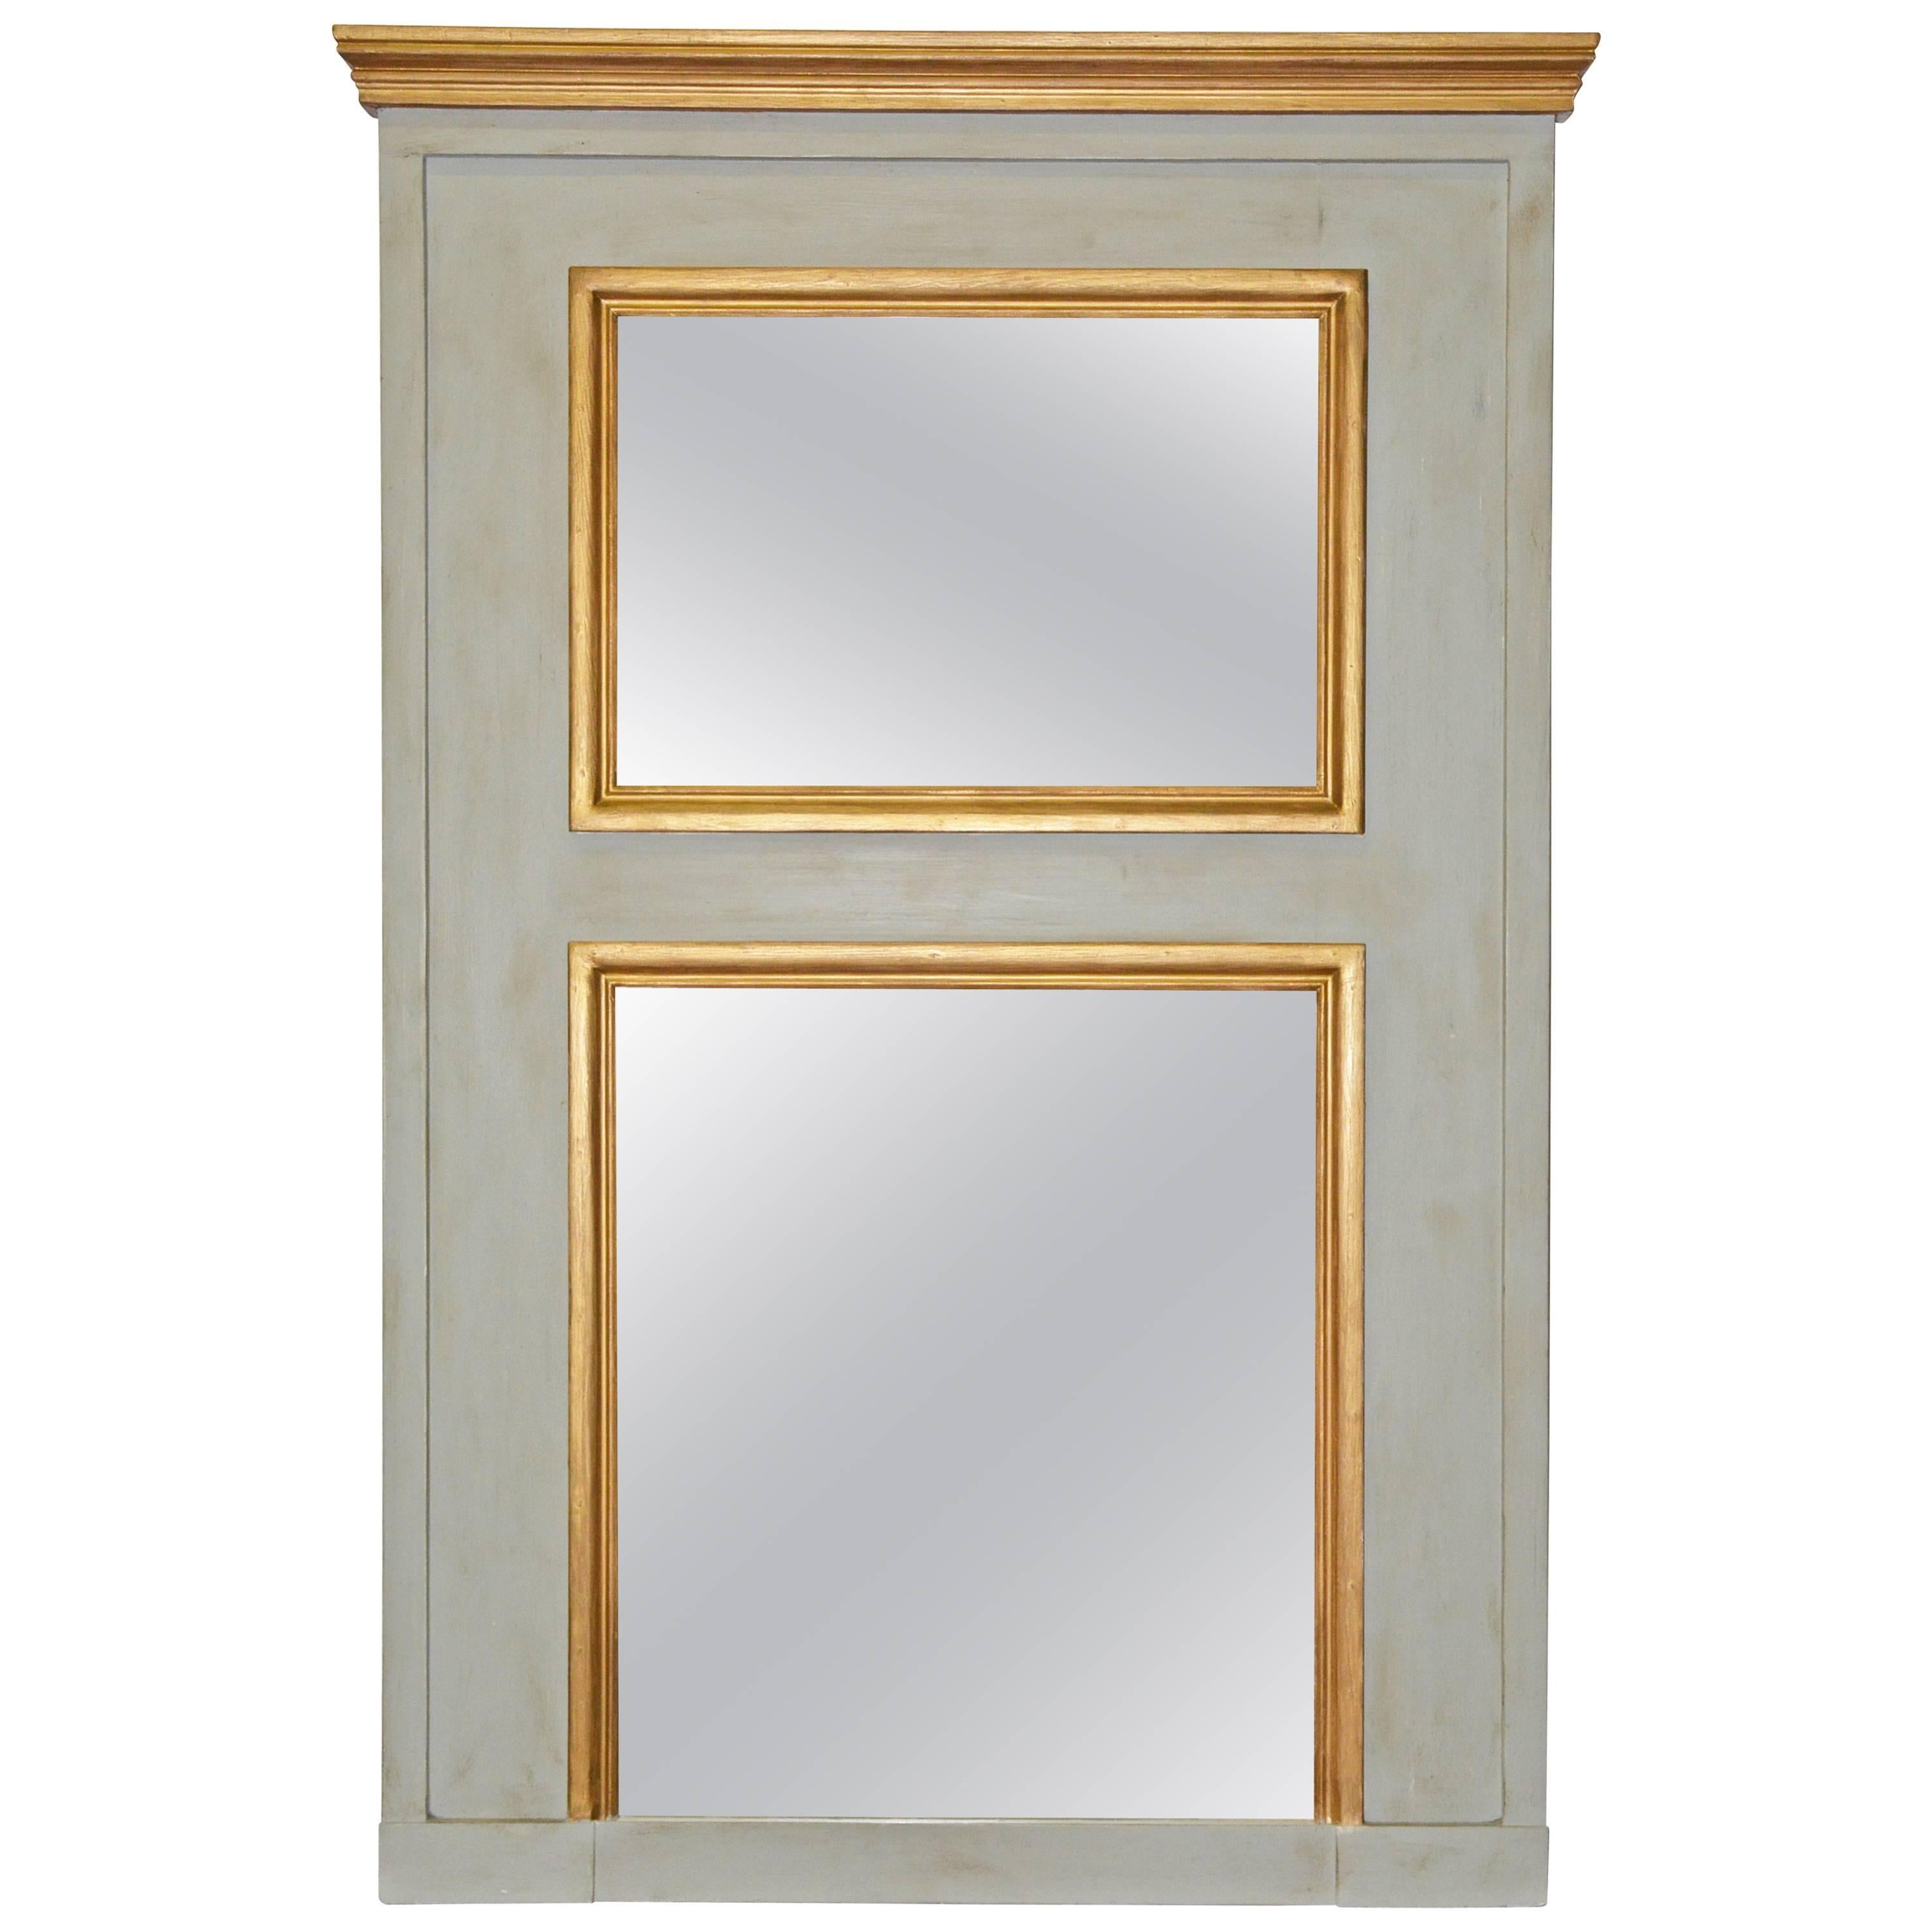 Neoclassical Style Trumeau Mantel Mirror